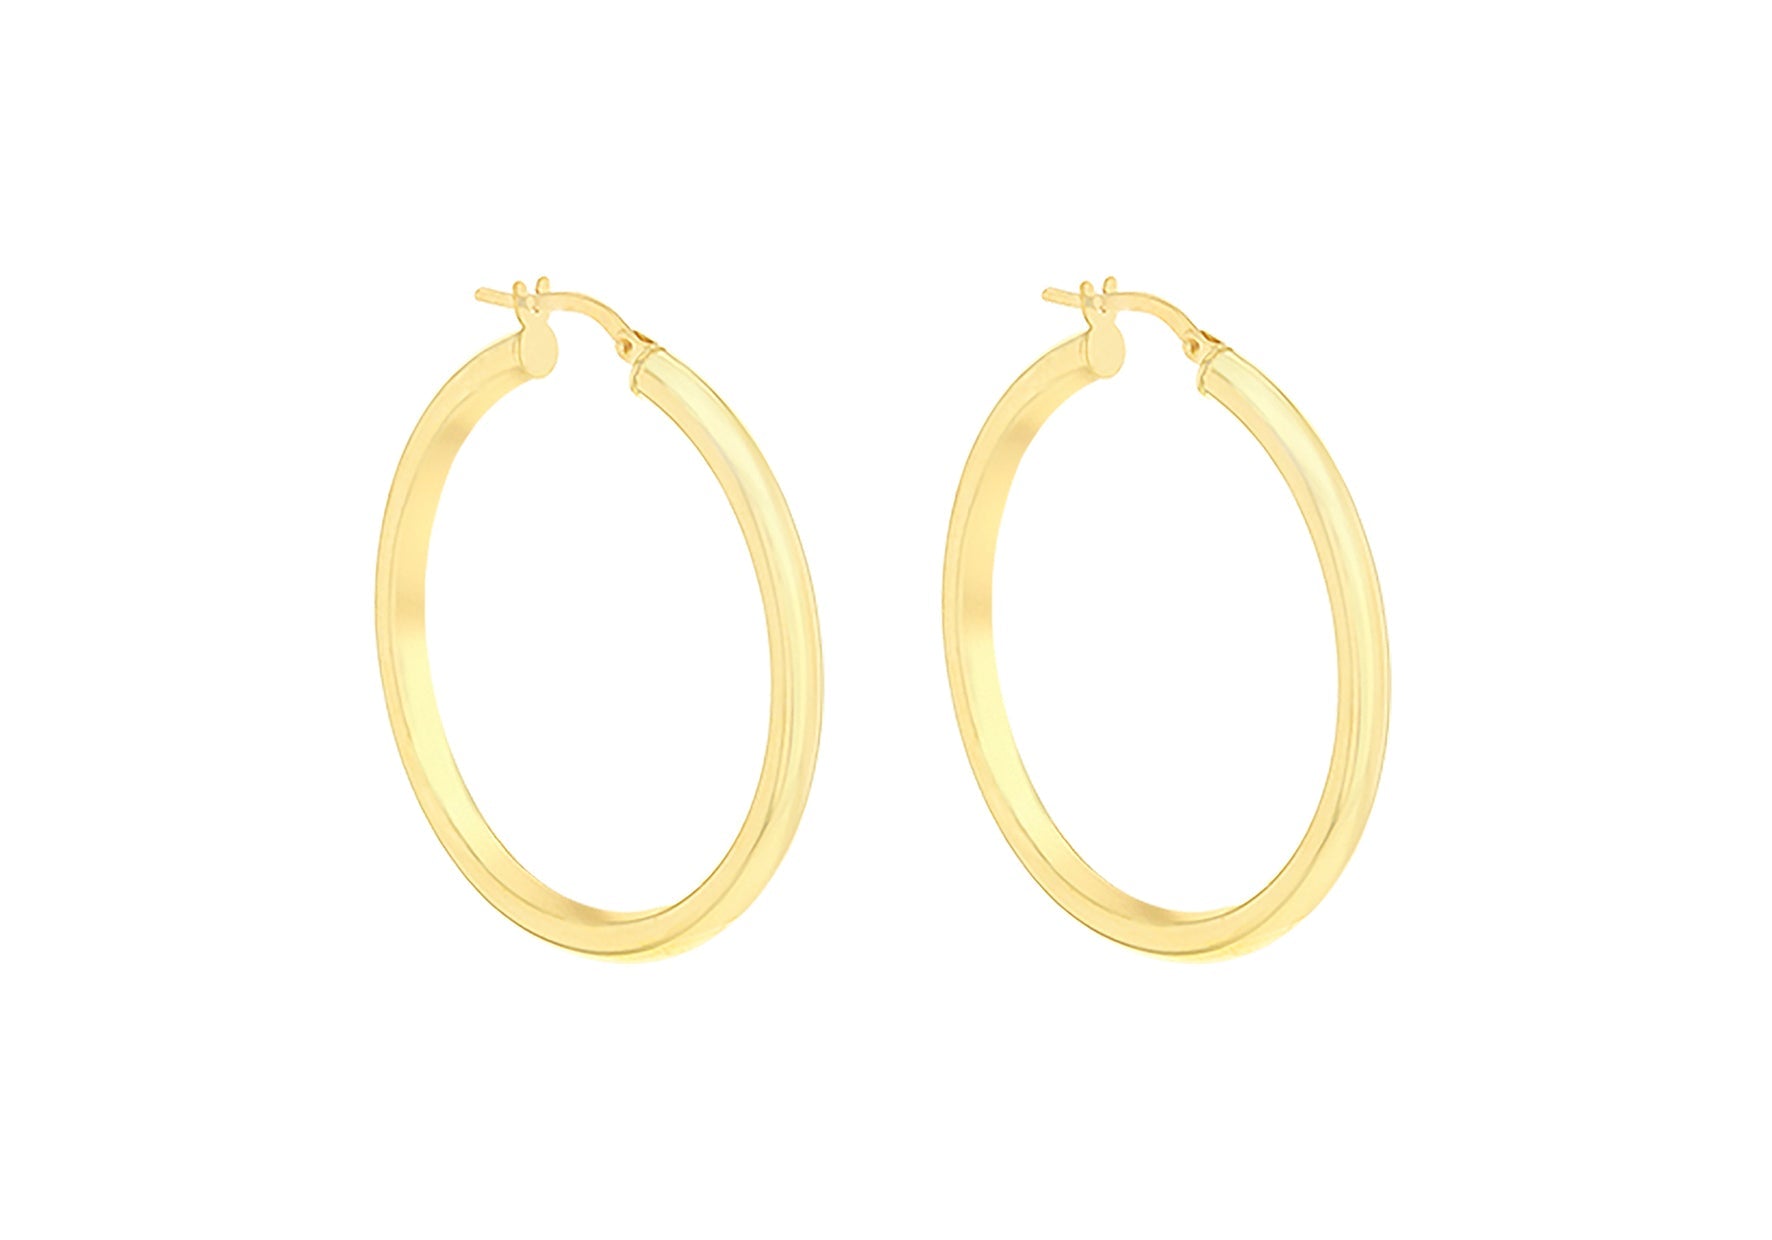 9ct Yellow Gold 3mm Round Hoop Earrings 35mm